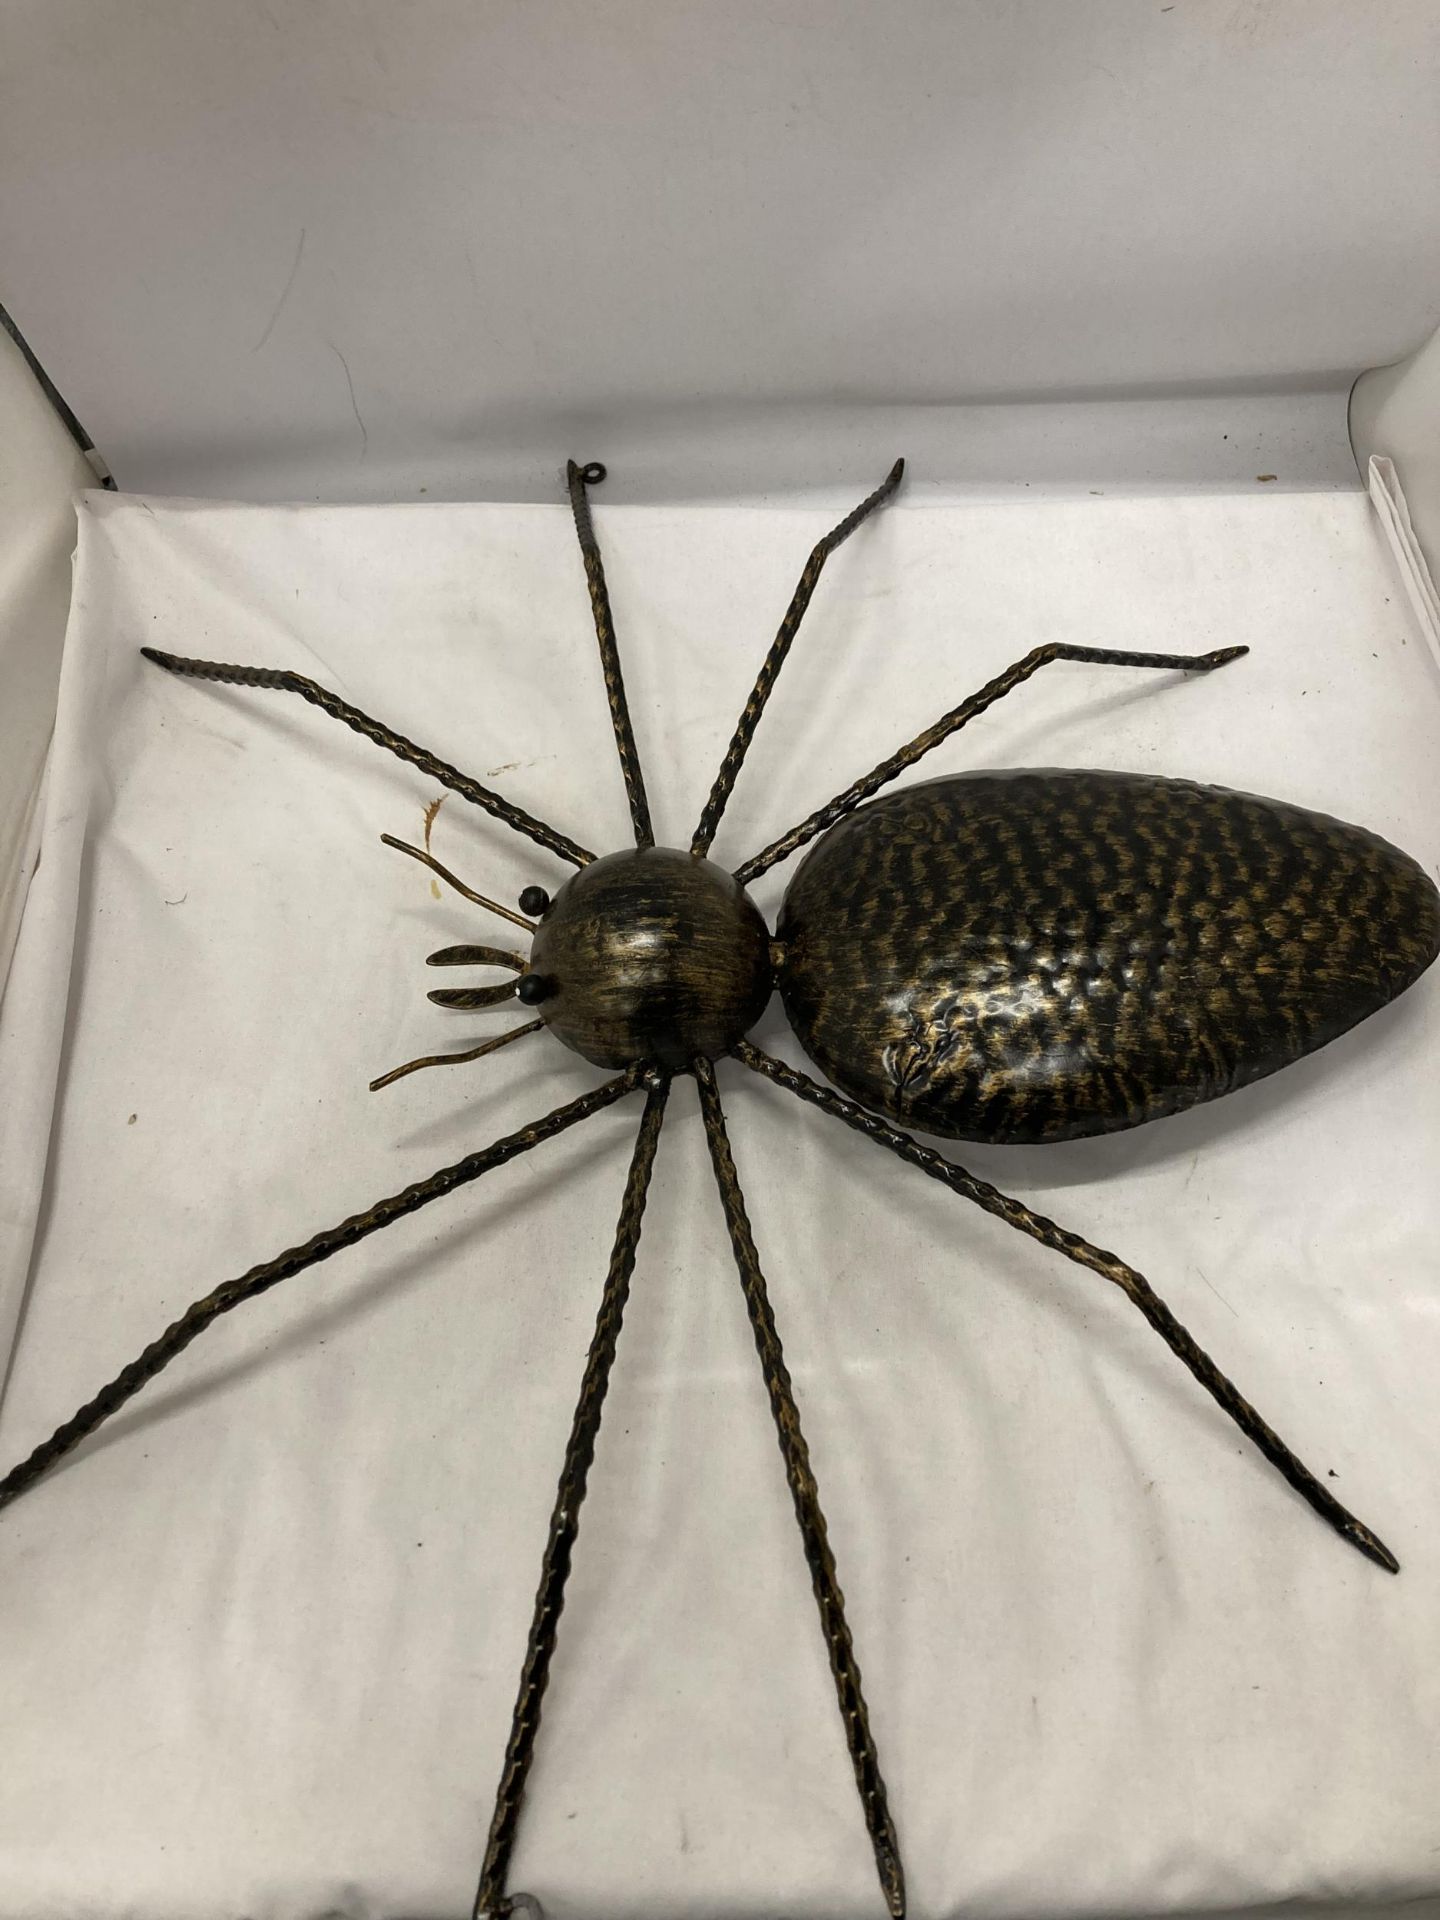 A LARGE METAL SPIDER